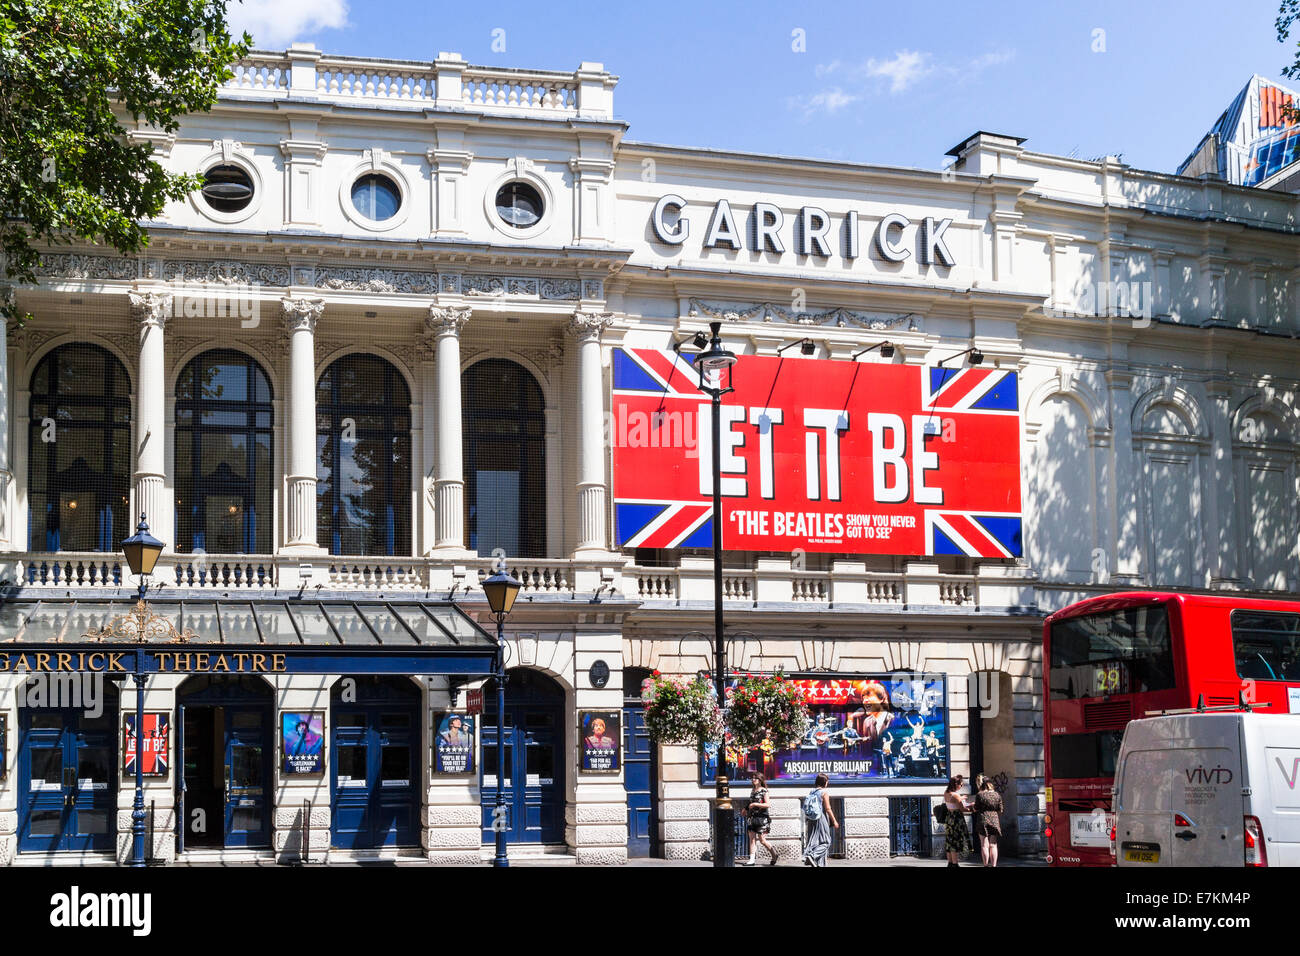 Let It Be at the Garrick theatre - London Stock Photo